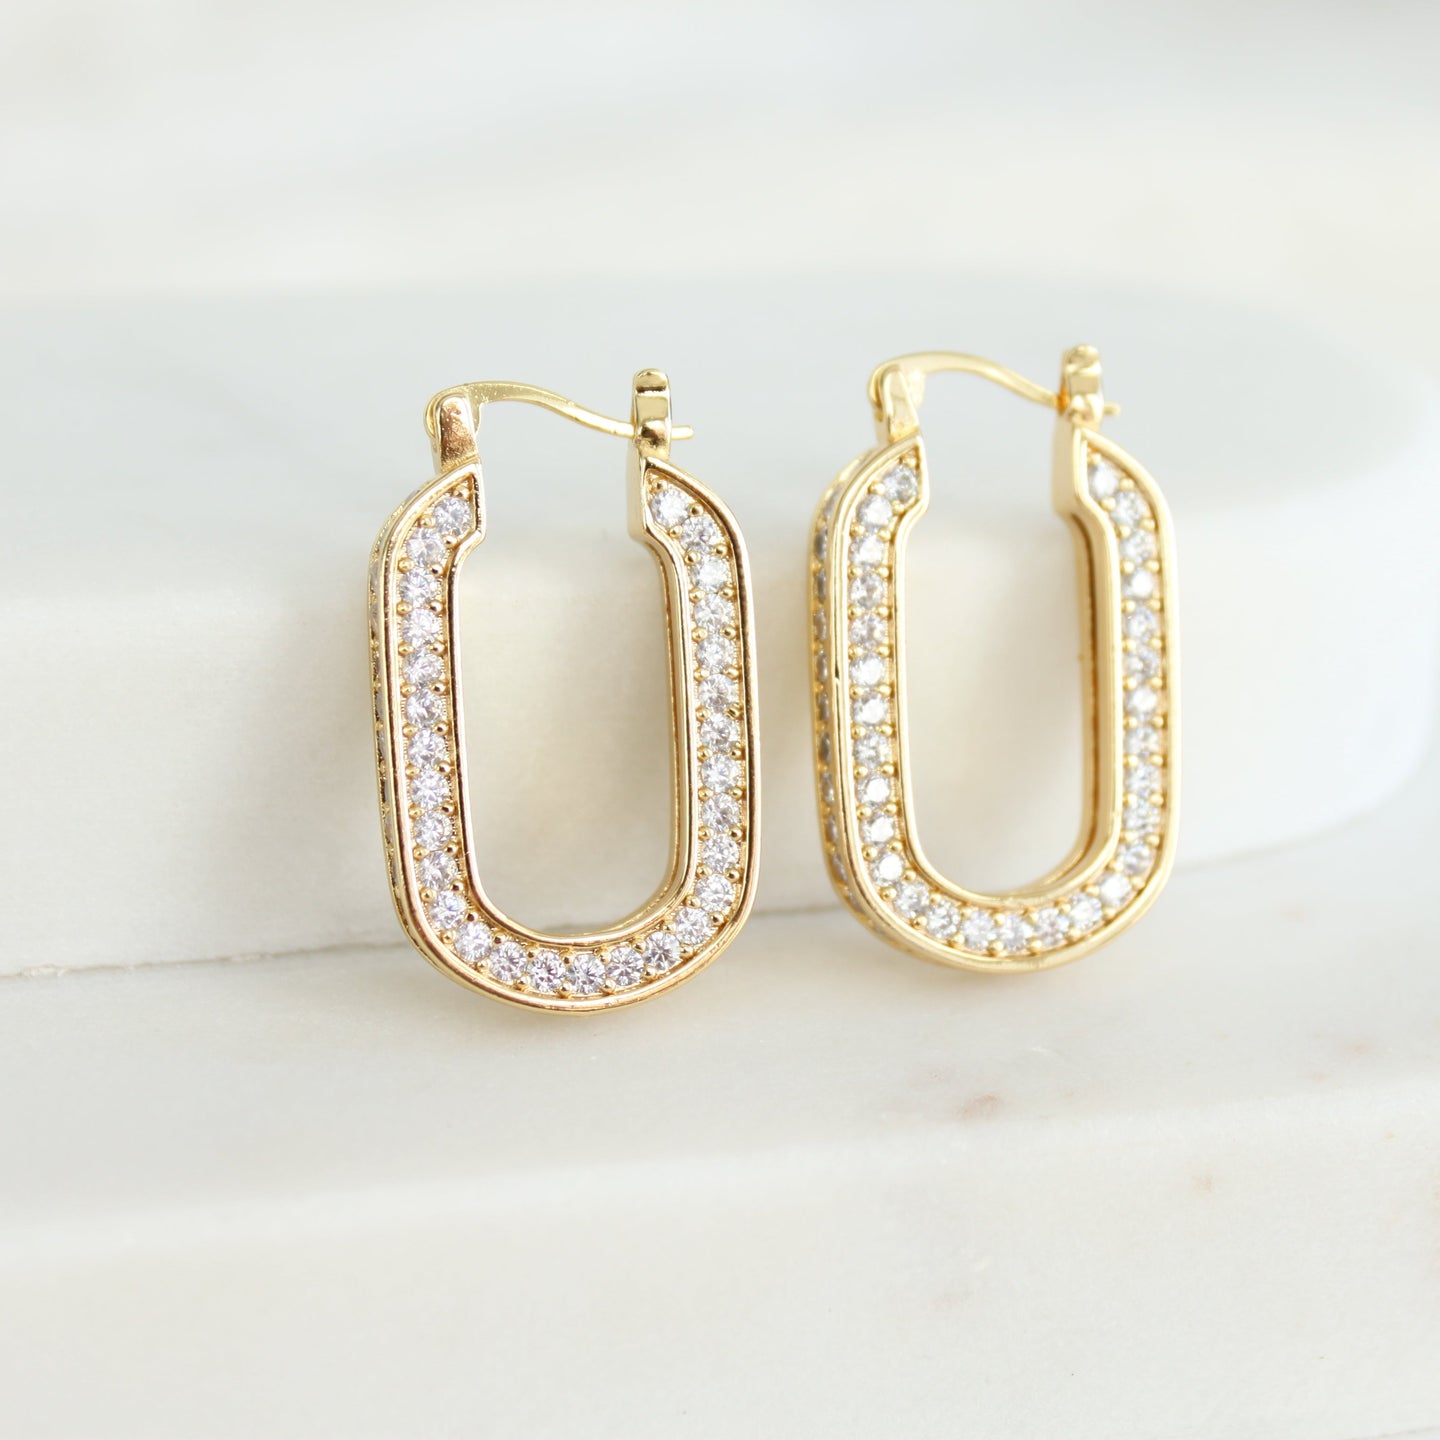 Pricilla Gold filled Statement Earring